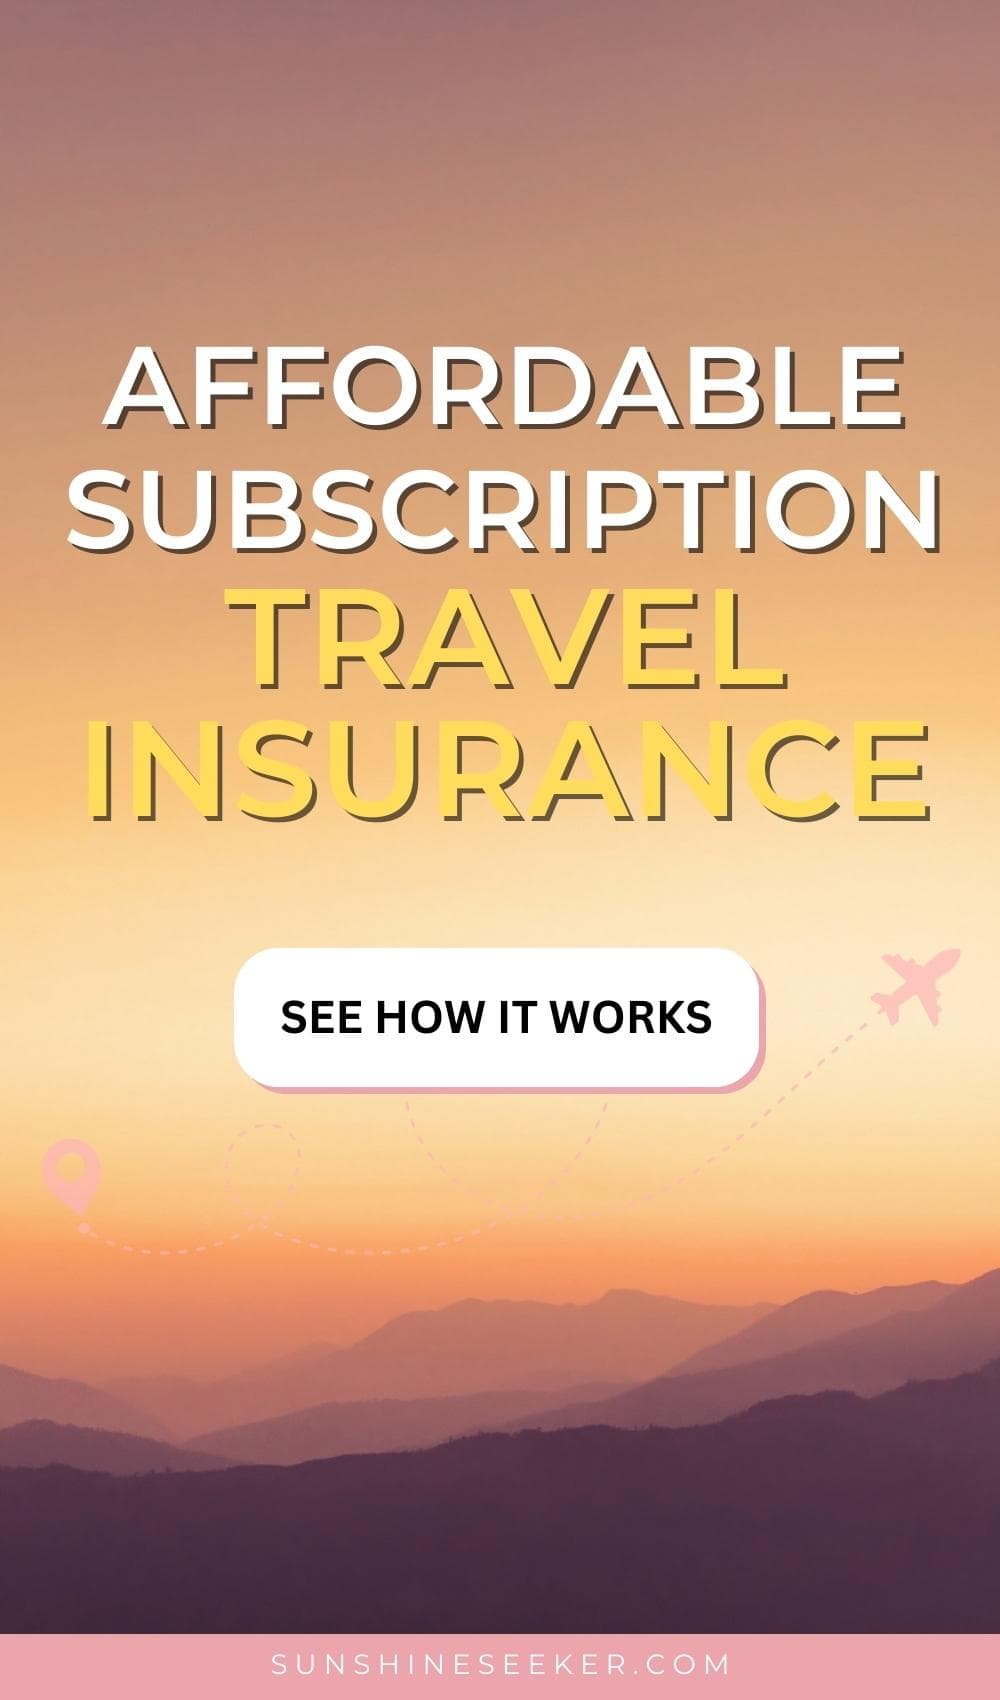 Warm golden colored sunset in the background with mountains at the bottom, white and yellow text with affordable subscription travel insurance.